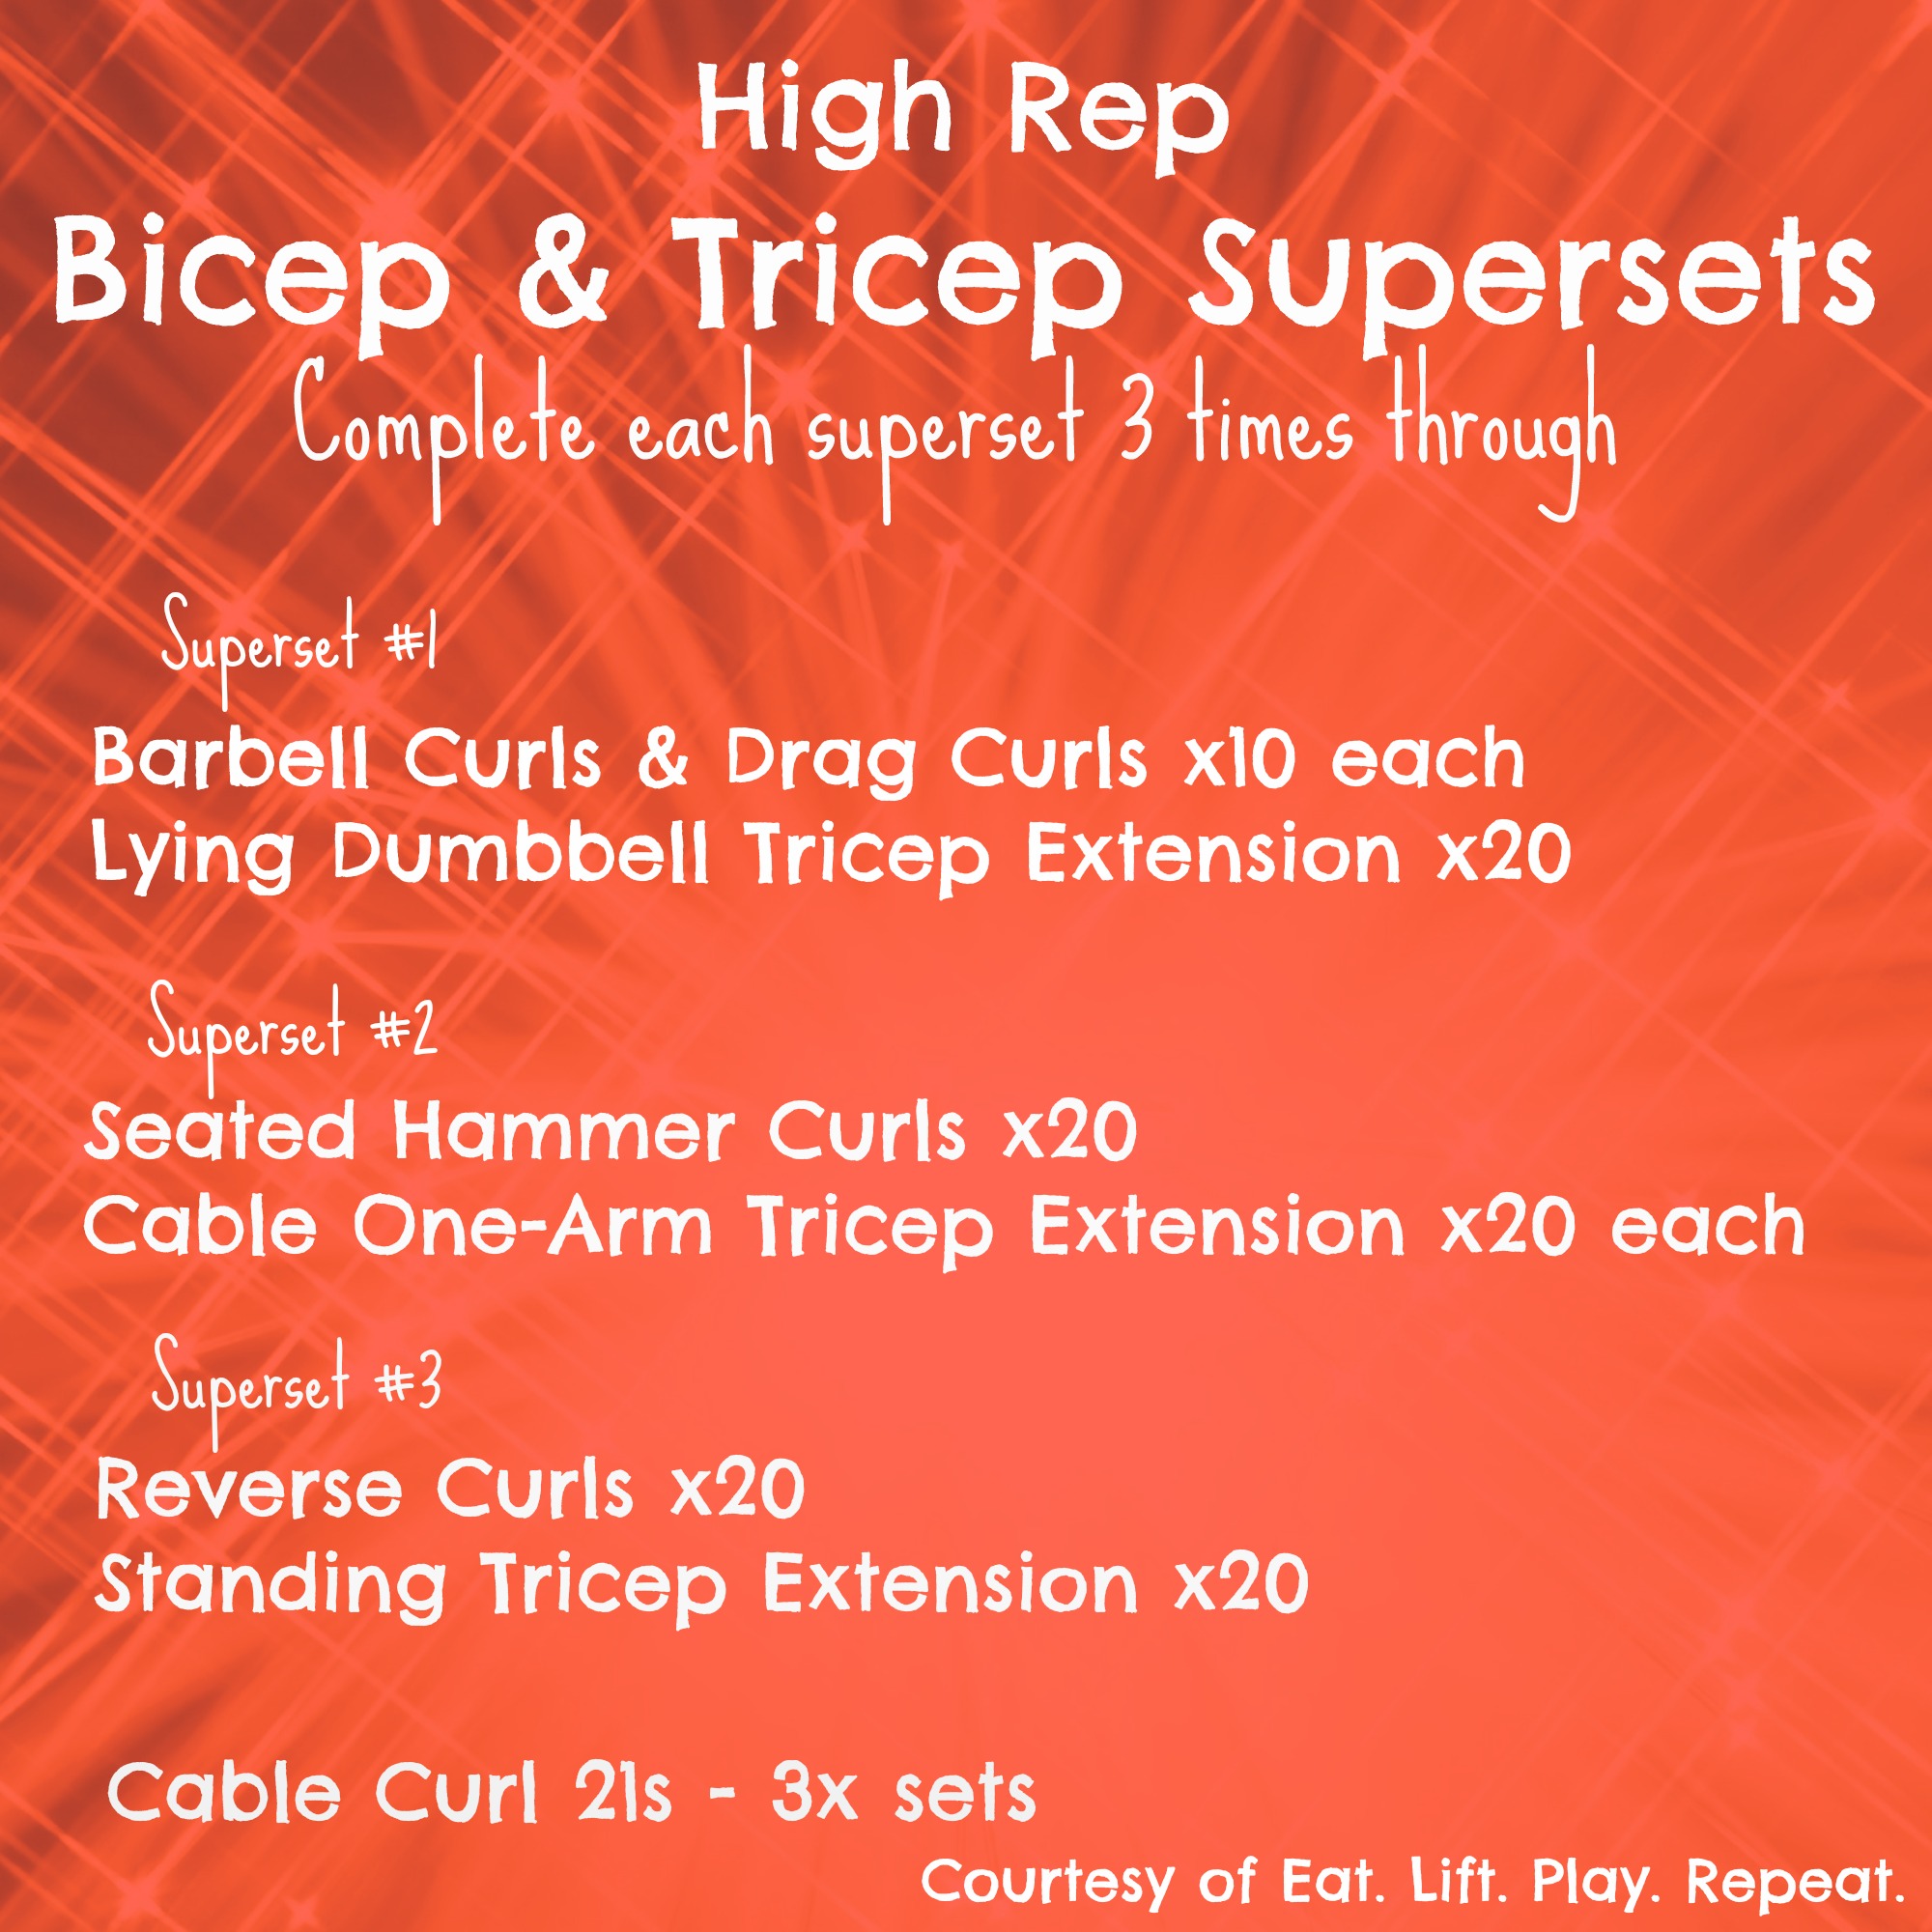 7min Home BICEPS and TRICEPS Workout 2.0 (DUMBBELL ONLY ARM